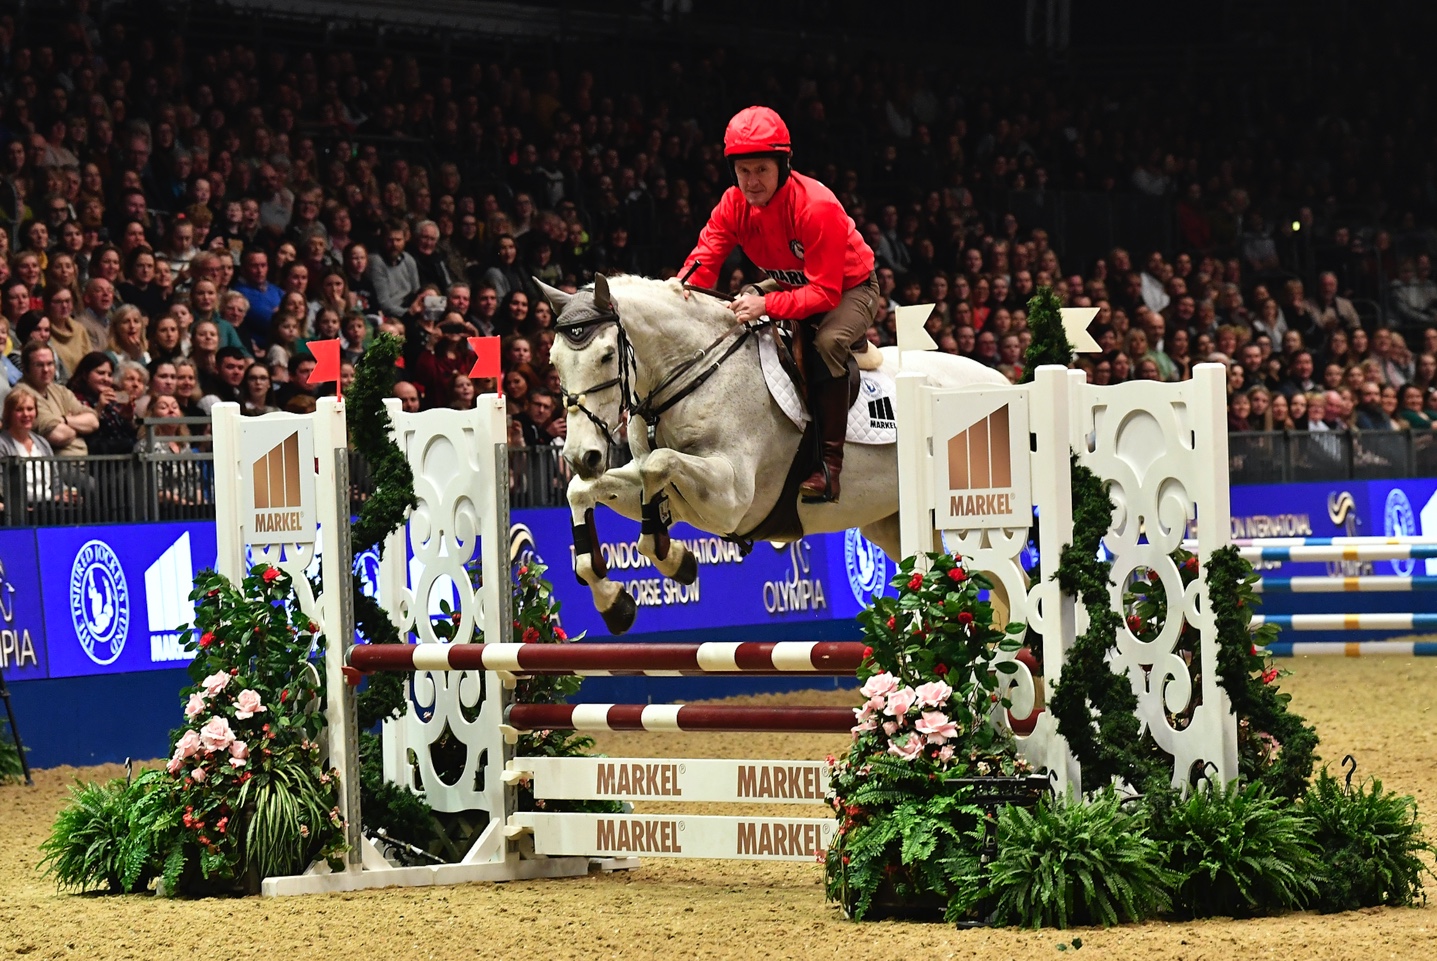 Sir Anthony McCoy riding at The London International Horse Show in the Markel Jockeys Jumping